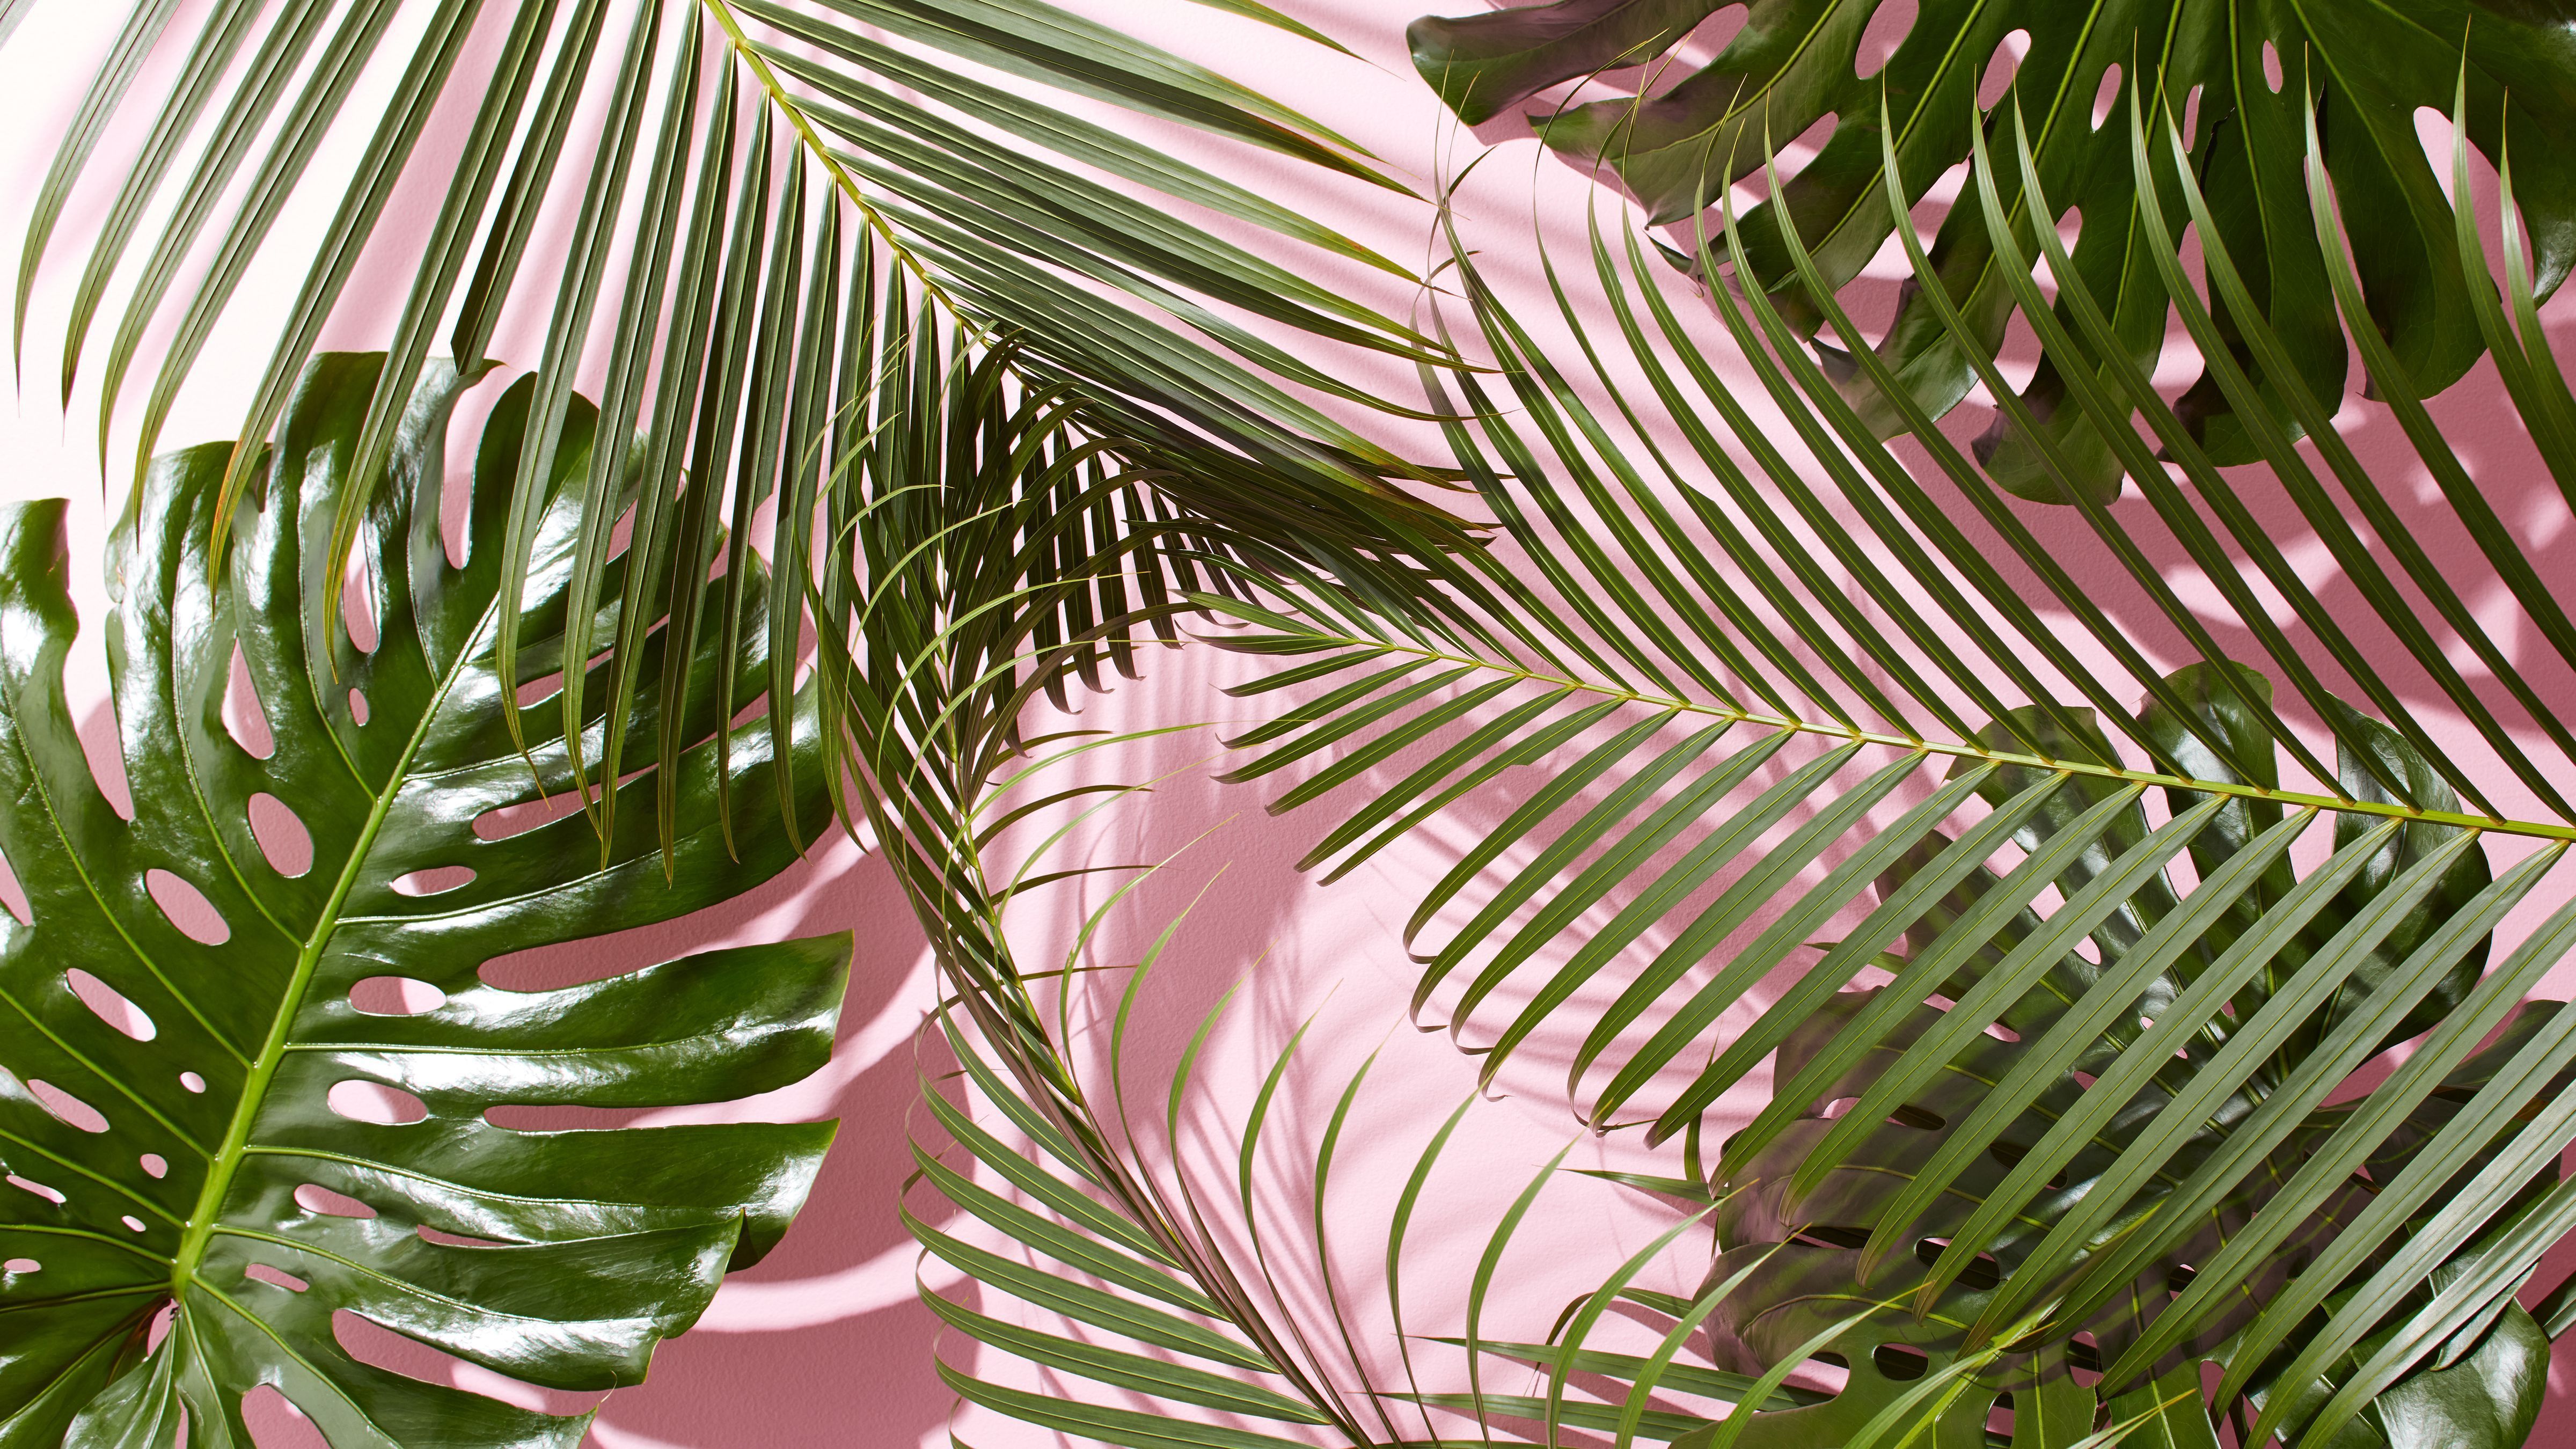 Monstera and palm leaves on a pink background - Travel, tropical, leaves, plants